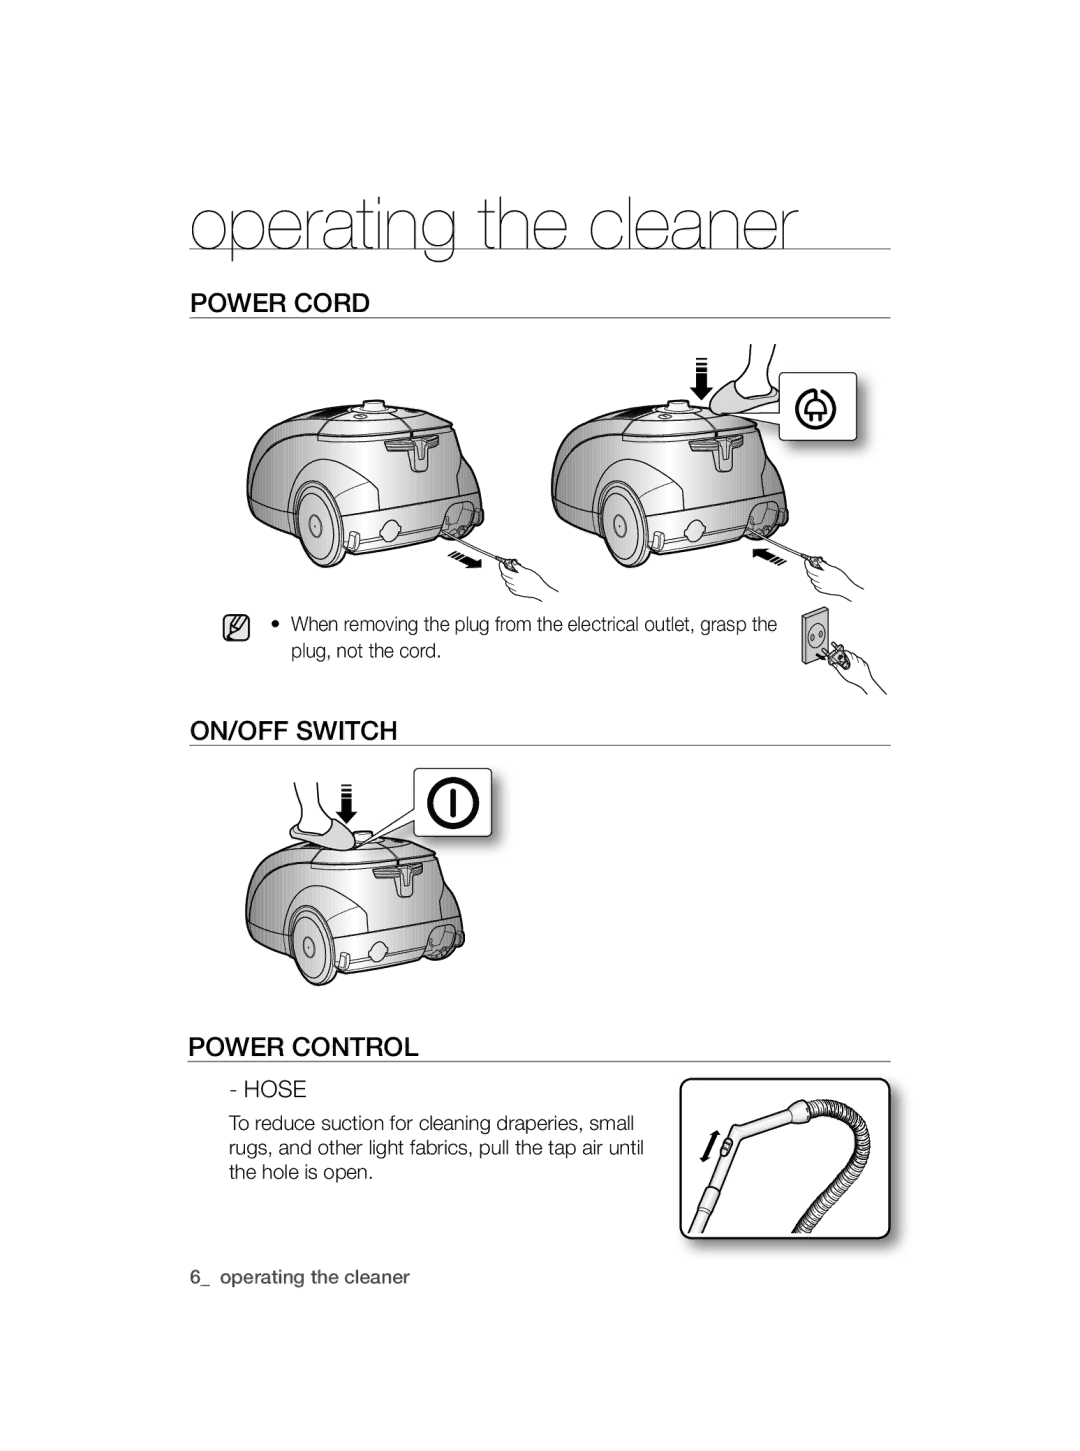 Samsung VCC56B0S3R/EGT, VCC56B0S38/TWL, VCC5610S3R/EGT manual Operating the cleaner, POwER cORD, On/off switch Power control 